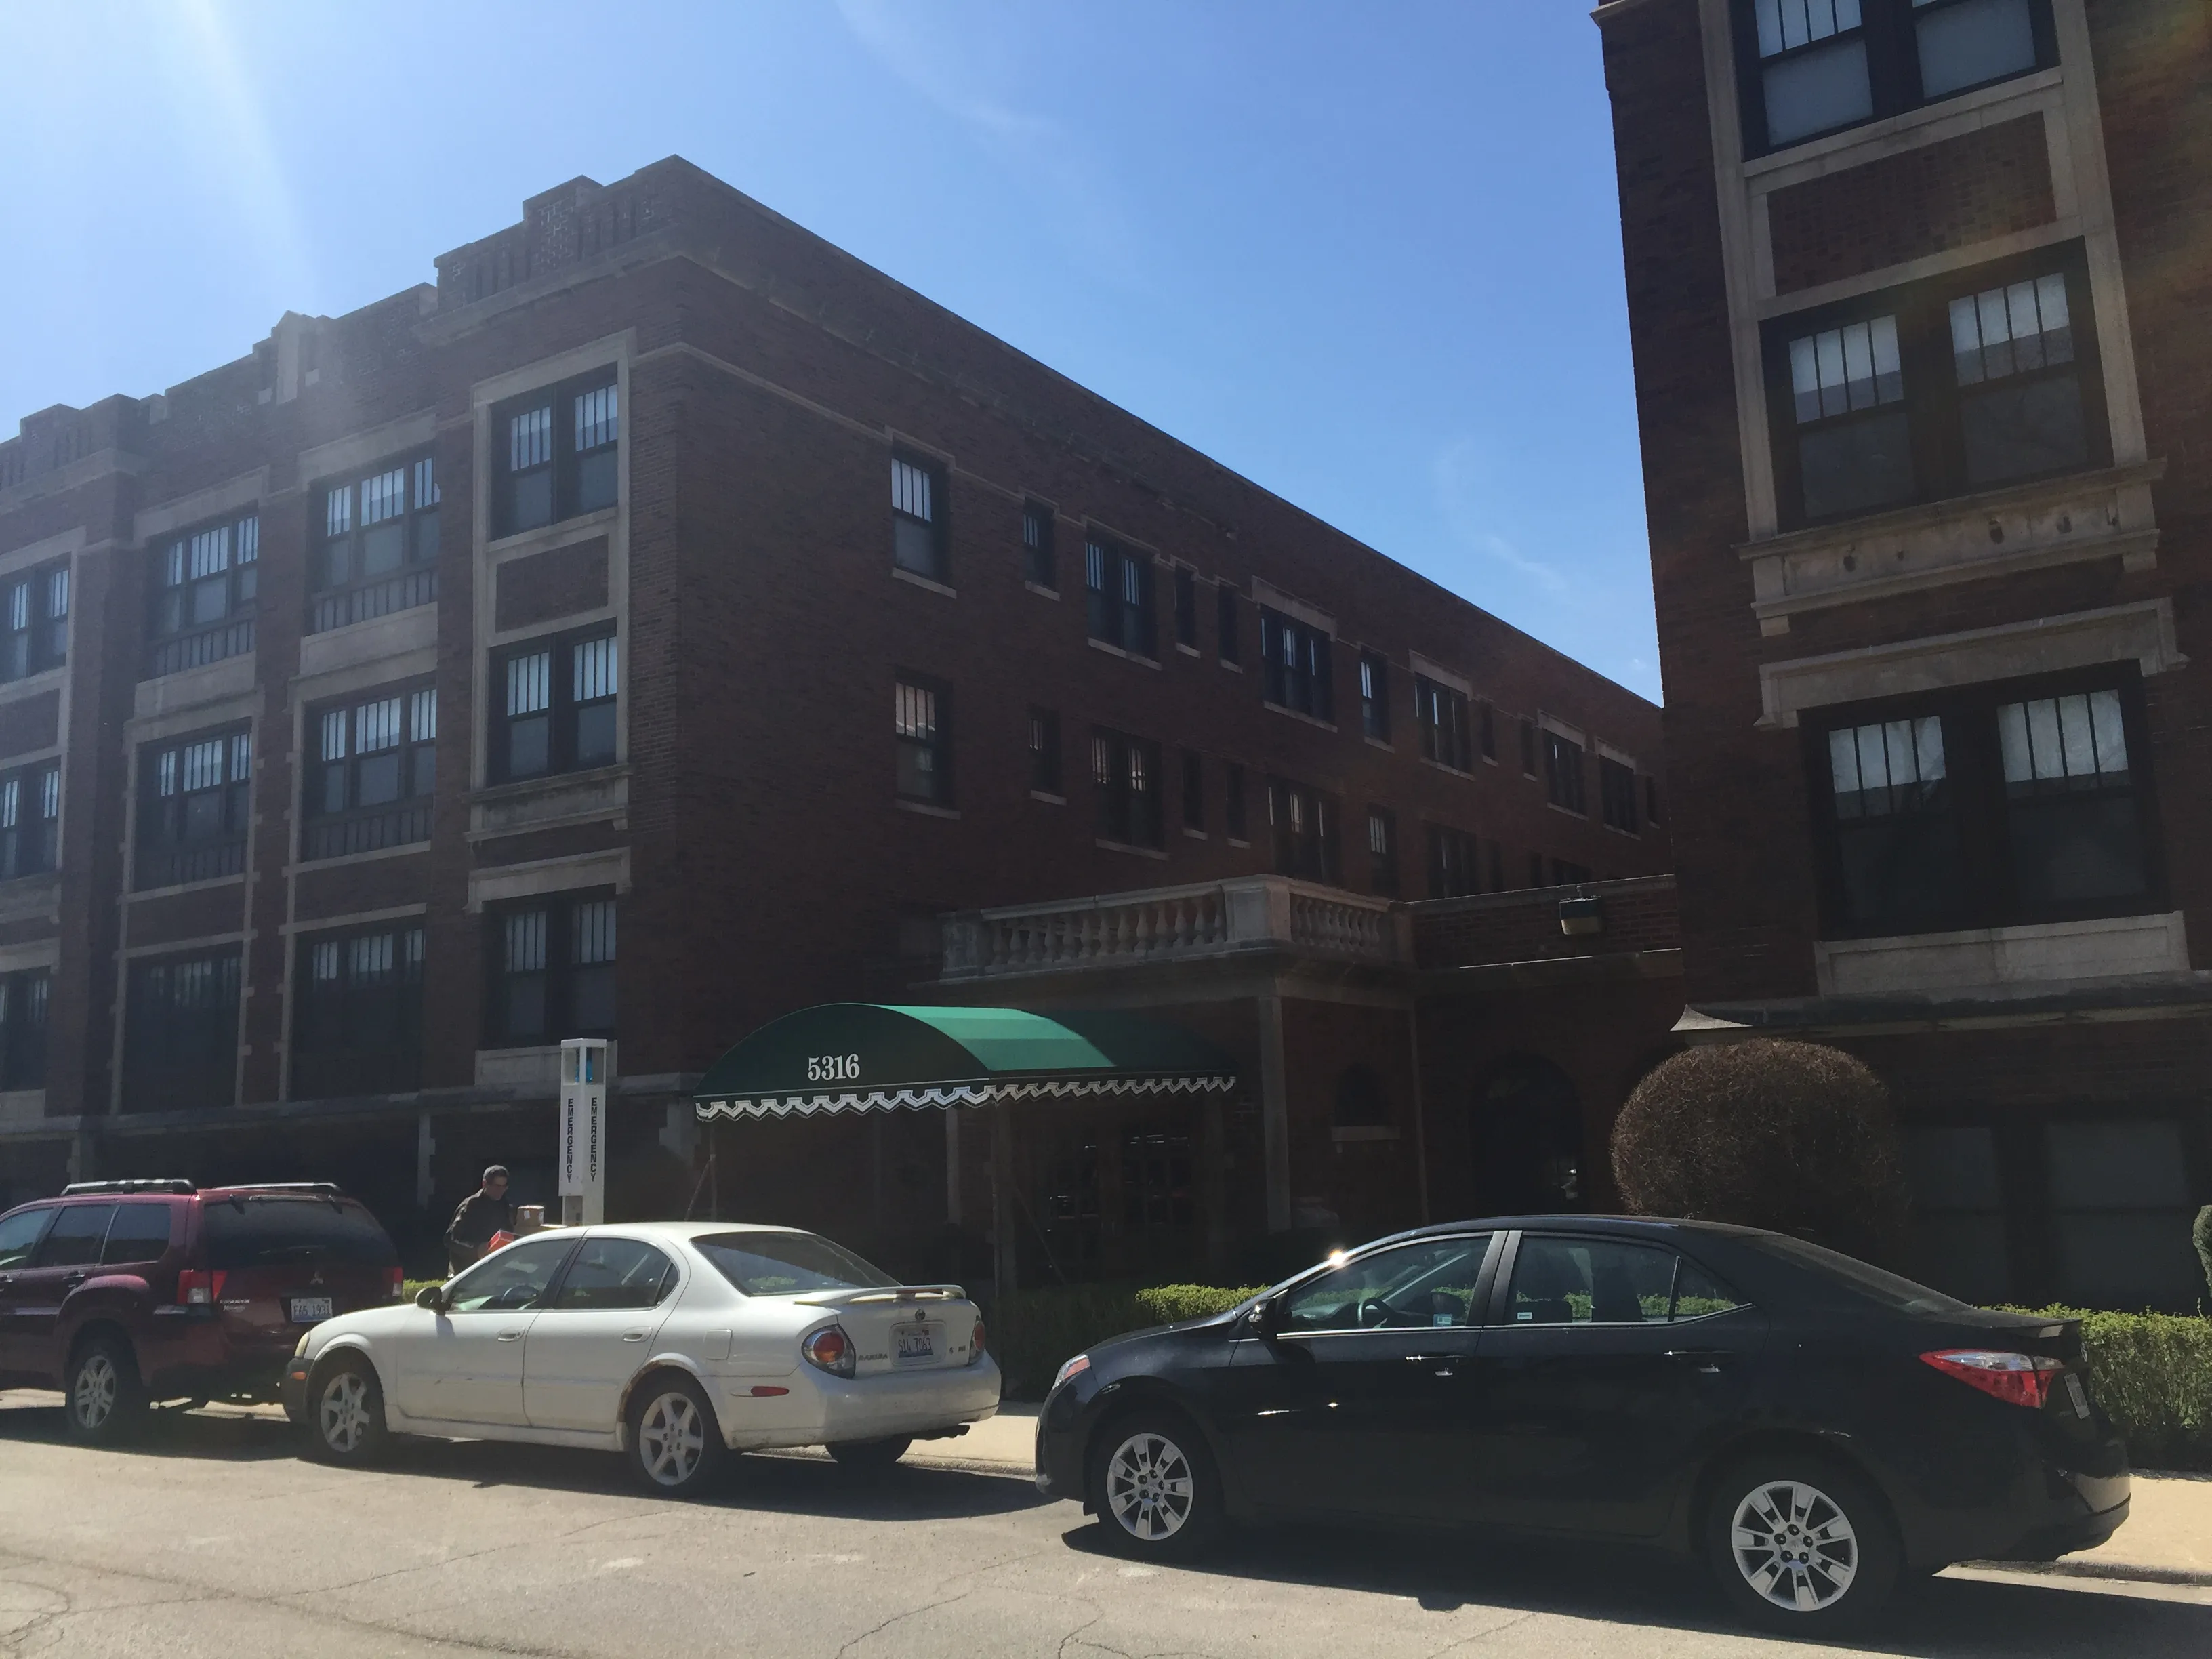 Exterior of 5316 South Dorchester Apartments in Hyde Park Chicago